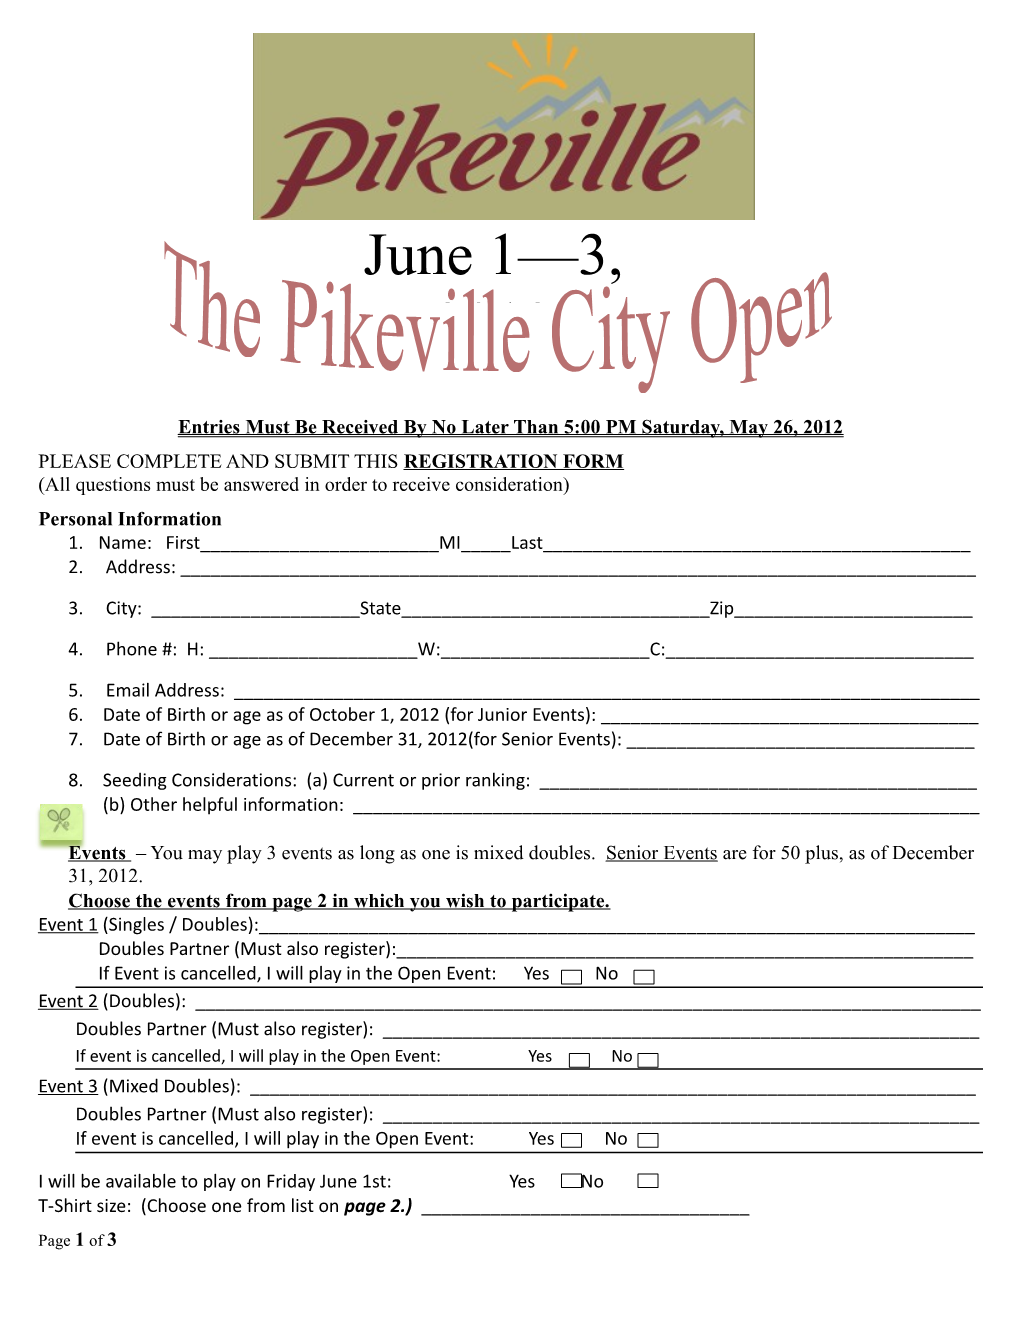 Entries Must Be Received by No Later Than 5:00 PM Saturday, May 26, 2012